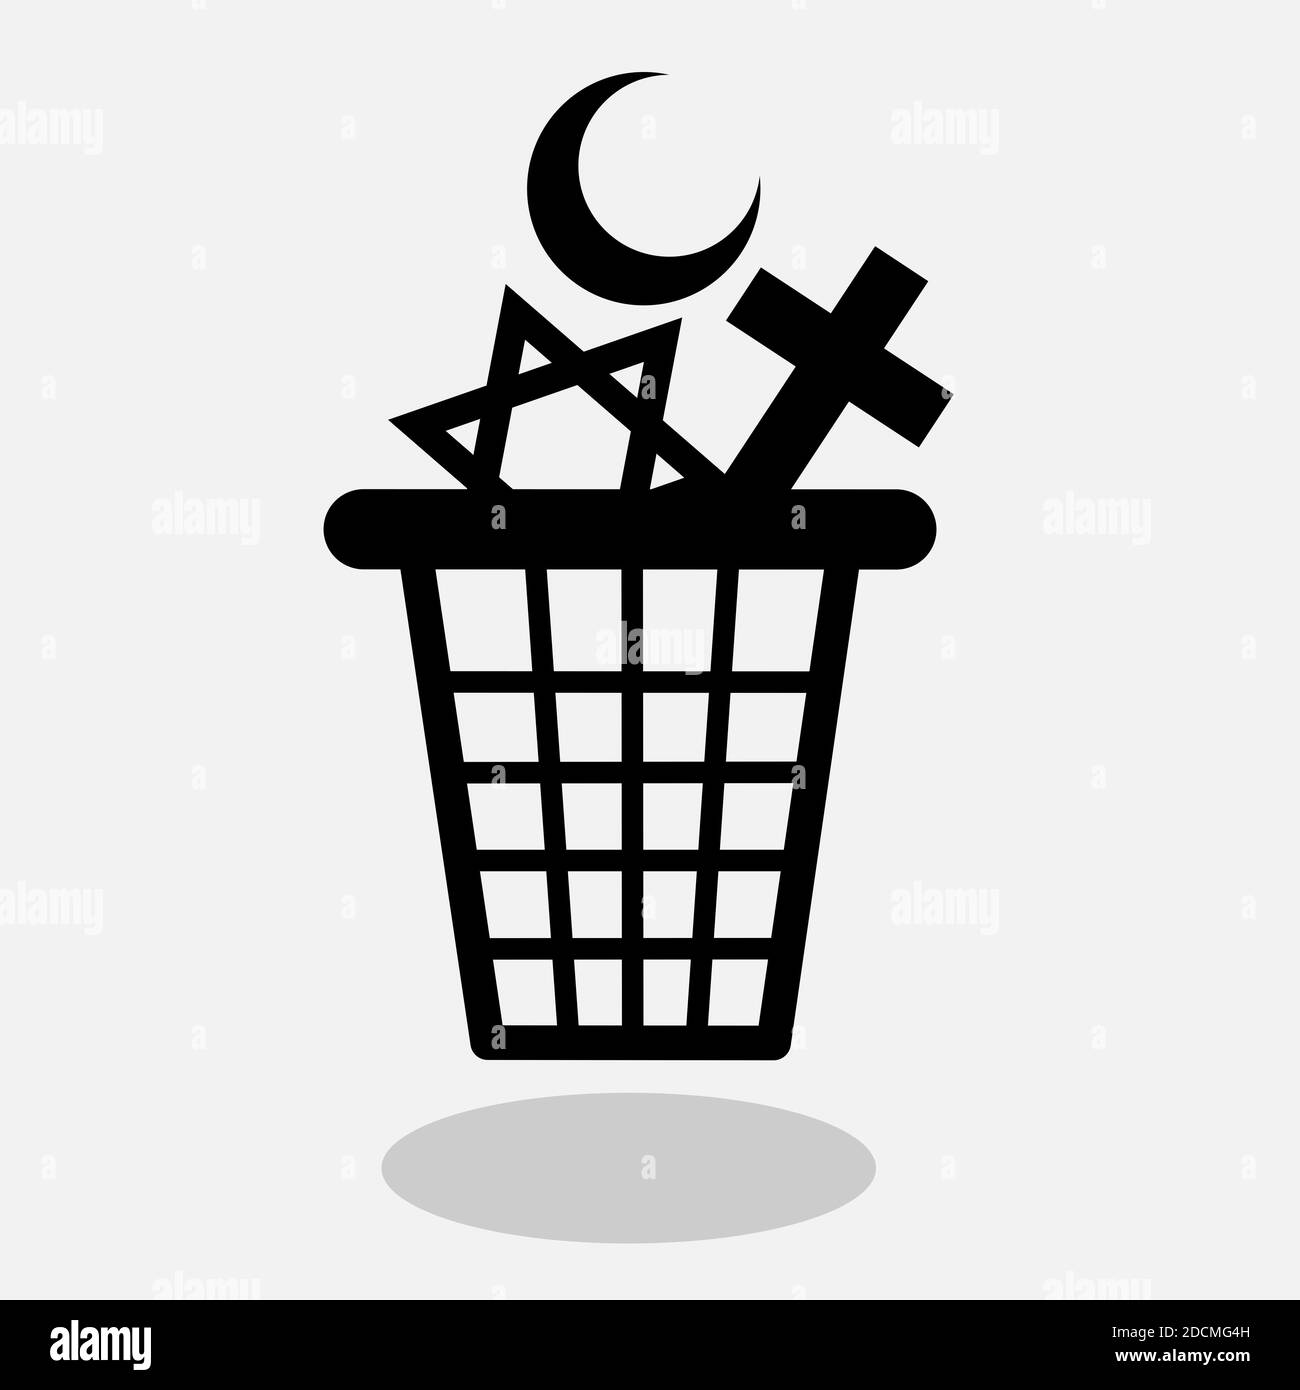 Atheism and end of religious belief - vector illustration of waste container with symbols of religions as metaphor of decline of religiosity and faith Stock Photo